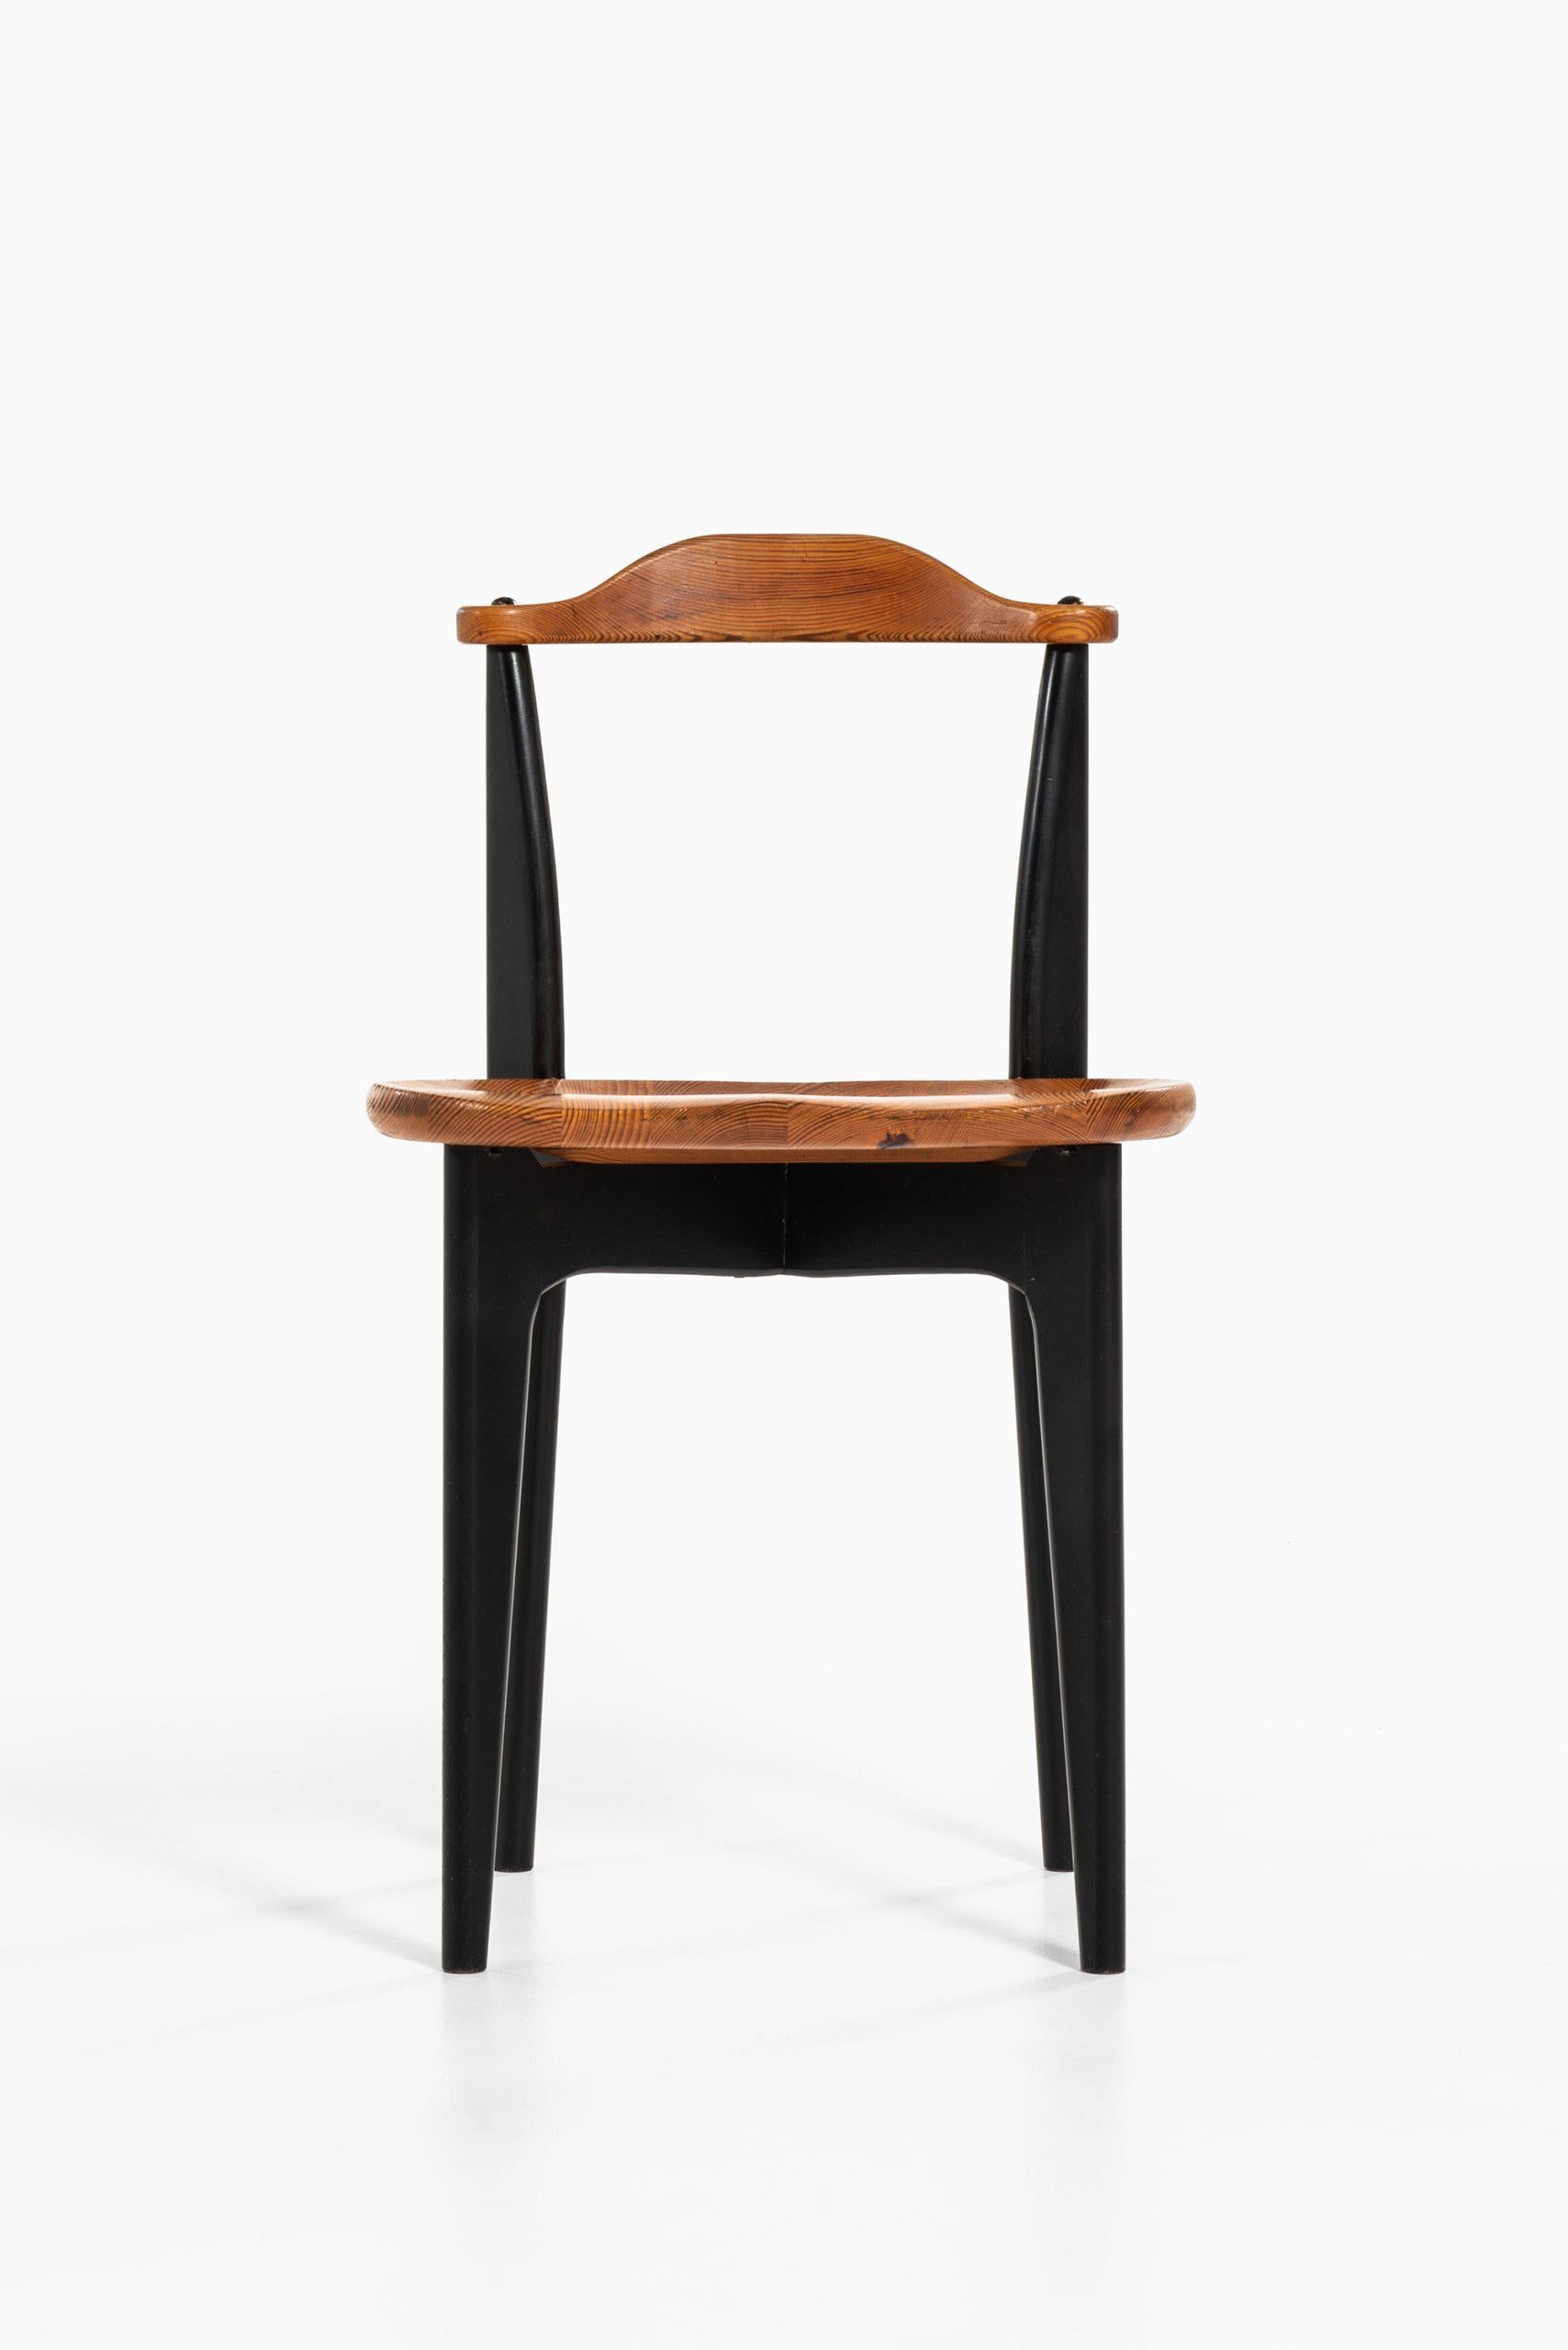 Wood Yngve Ekström Dining Chairs Model Thema Produced by Swedese in Sweden For Sale